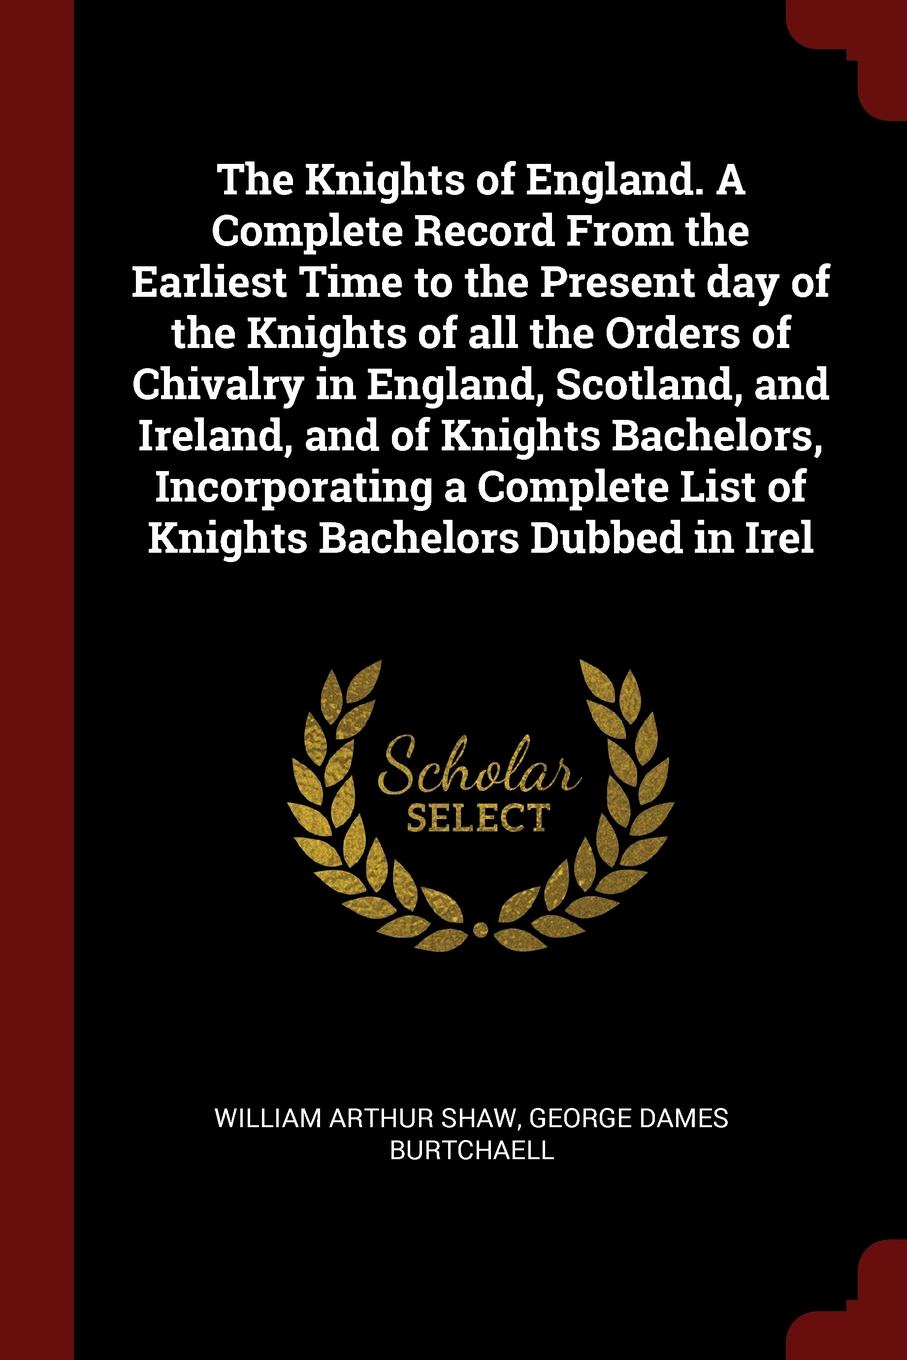 The Knights of England. A Complete Record From the Earliest Time to the Present day of the Knights of all the Orders of Chivalry in England, Scotland, and Ireland, and of Knights Bachelors, Incorporating a Complete List of Knights Bachelors Dubbed...